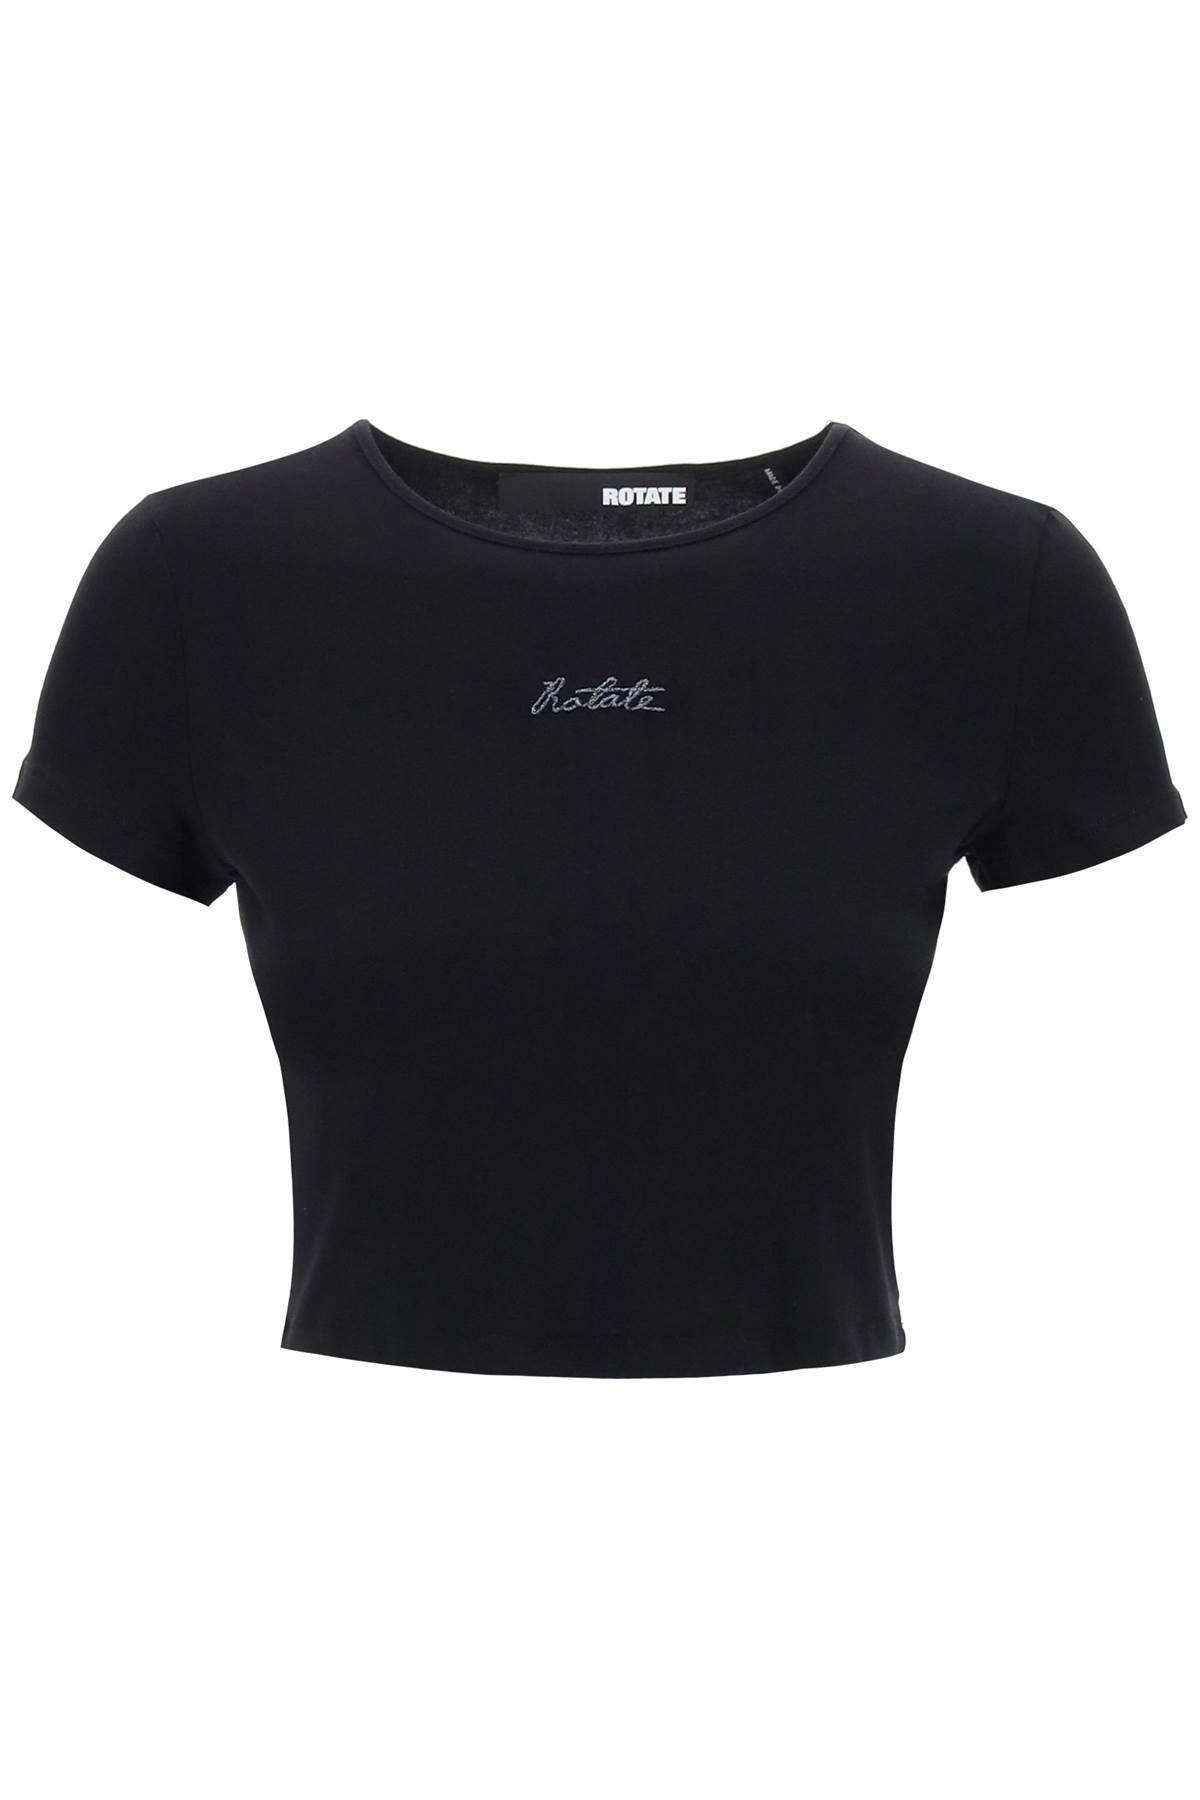 Rotate ROTATE cropped t-shirt with embroidered lurex logo